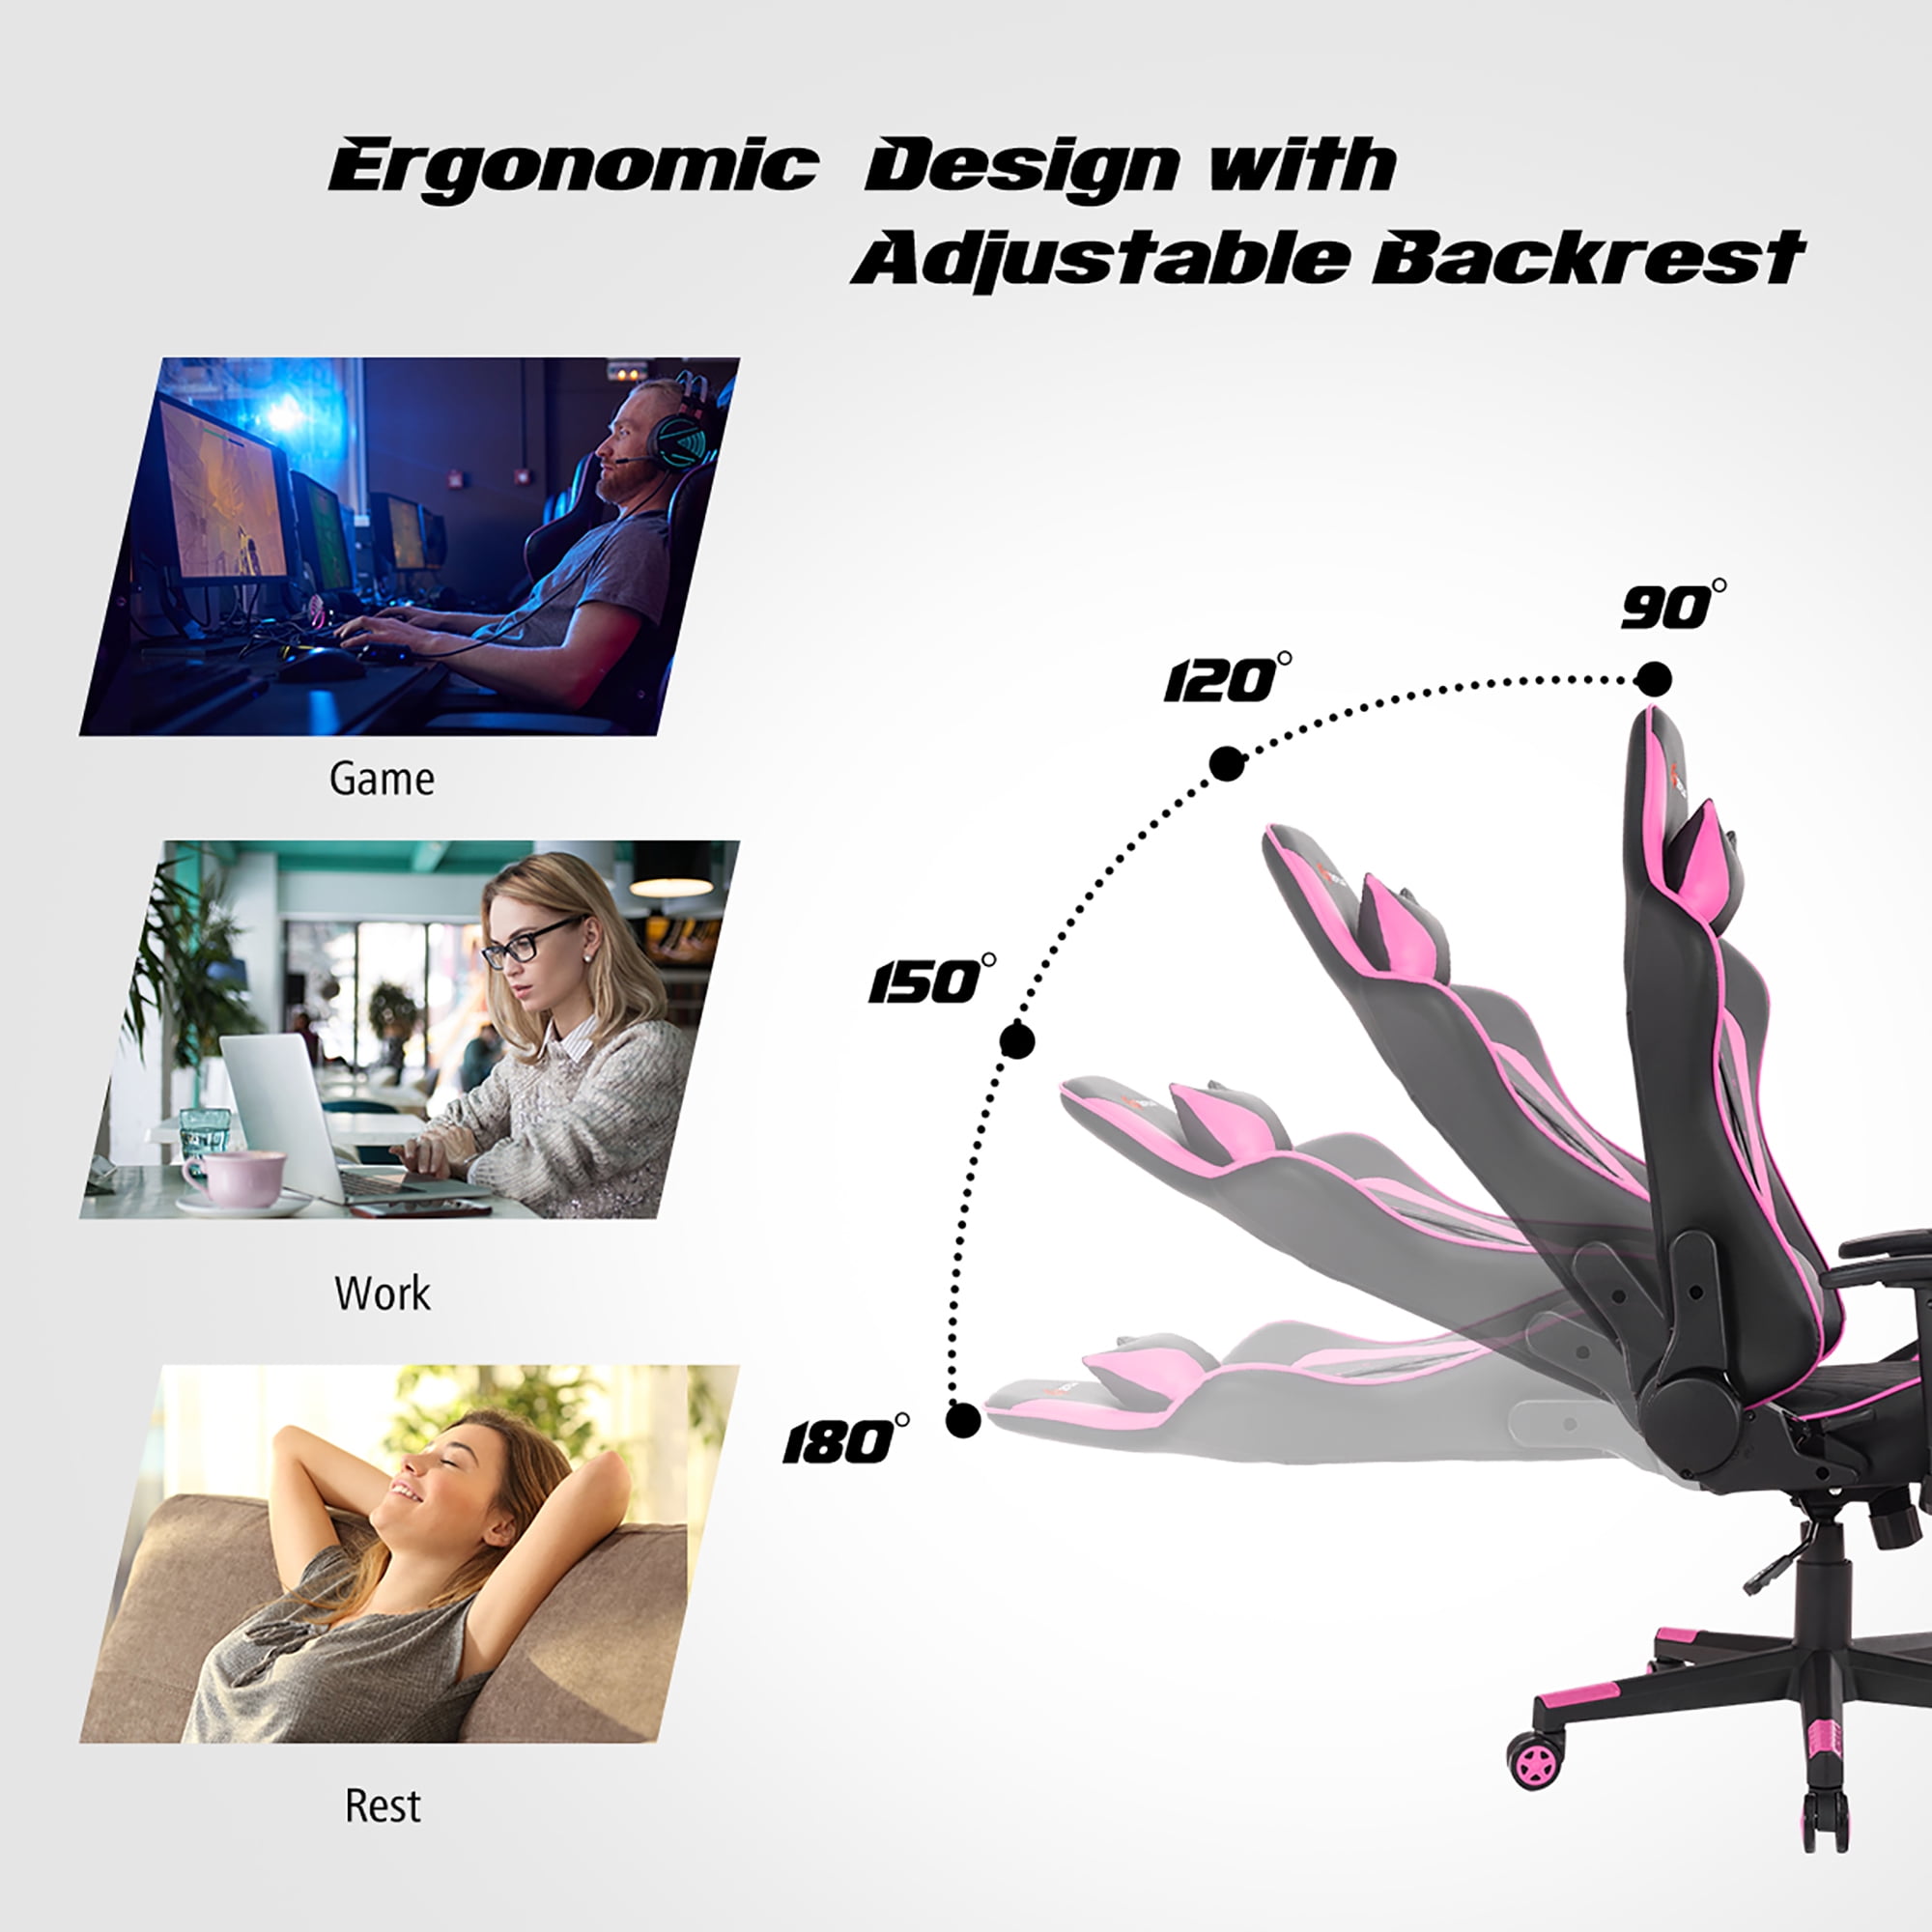 Goplus Massage LED Gaming Chair Reclining Racing Chair with Lumbar Support  and Footrest in Pink HW62042PI - The Home Depot